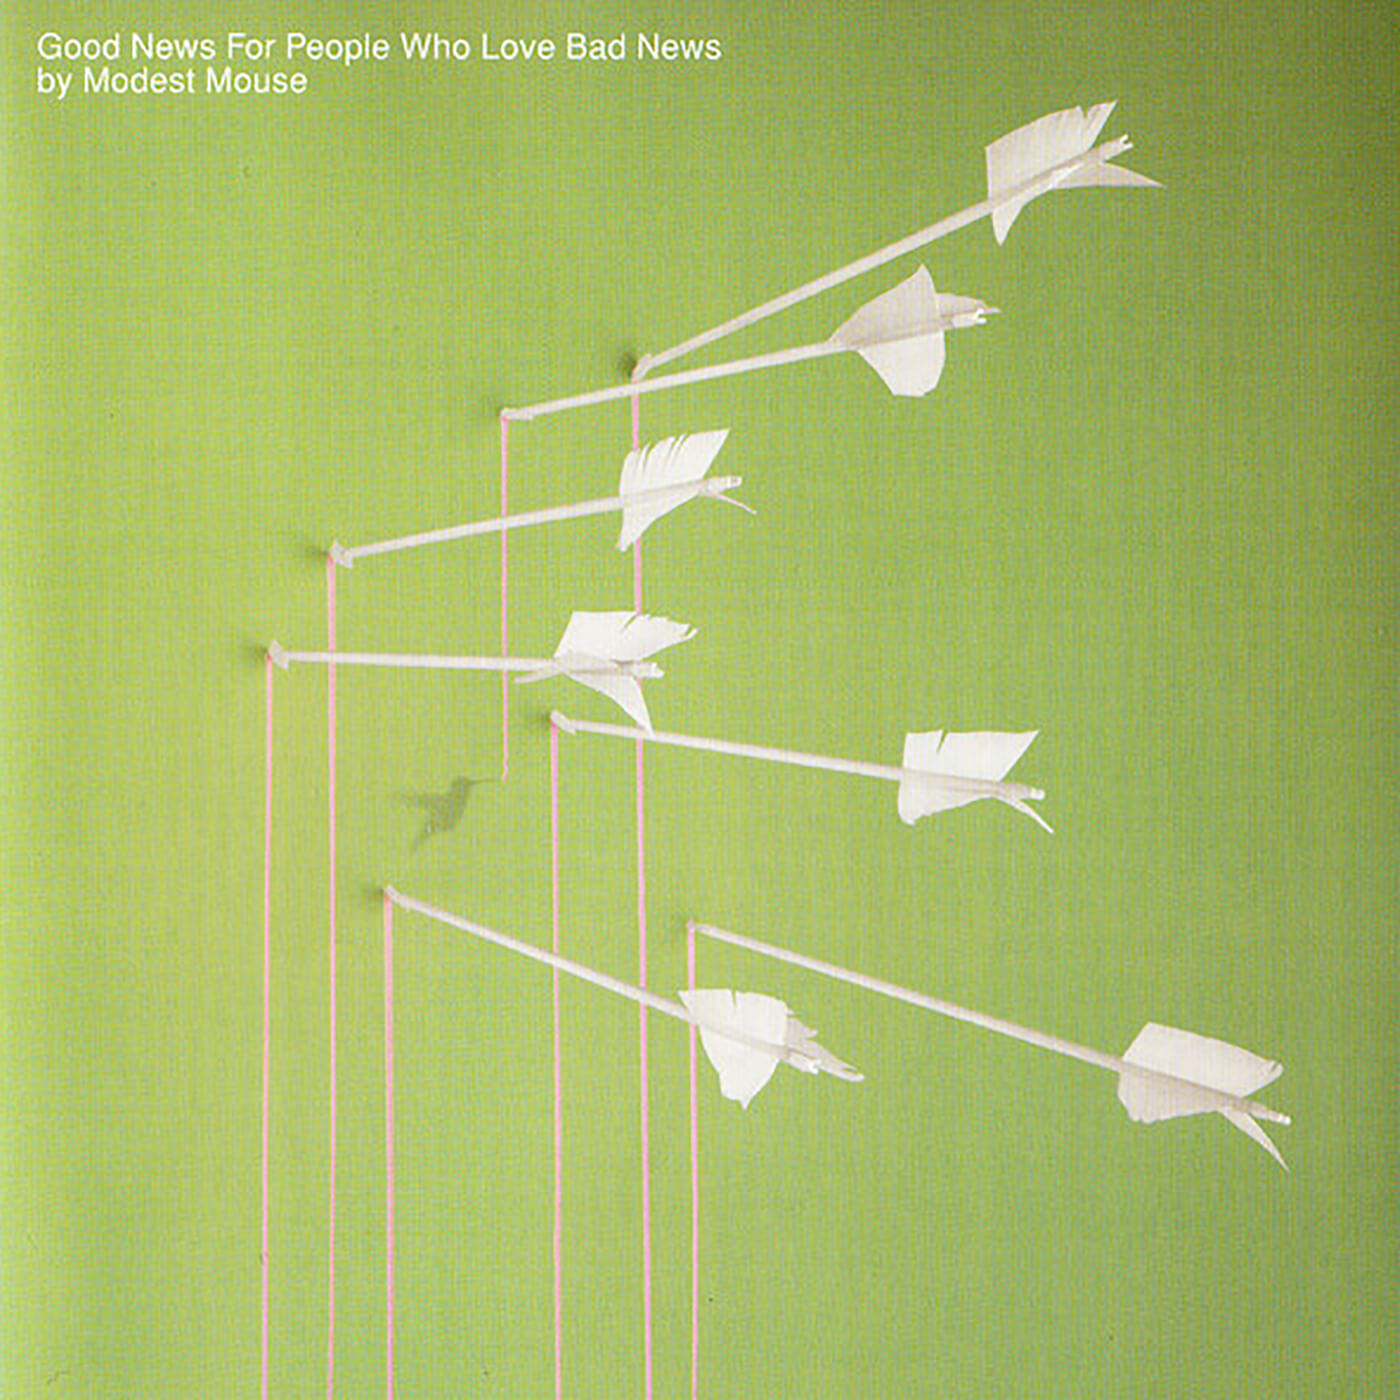 Good News For People Who Love Bad News by Modest Mouse